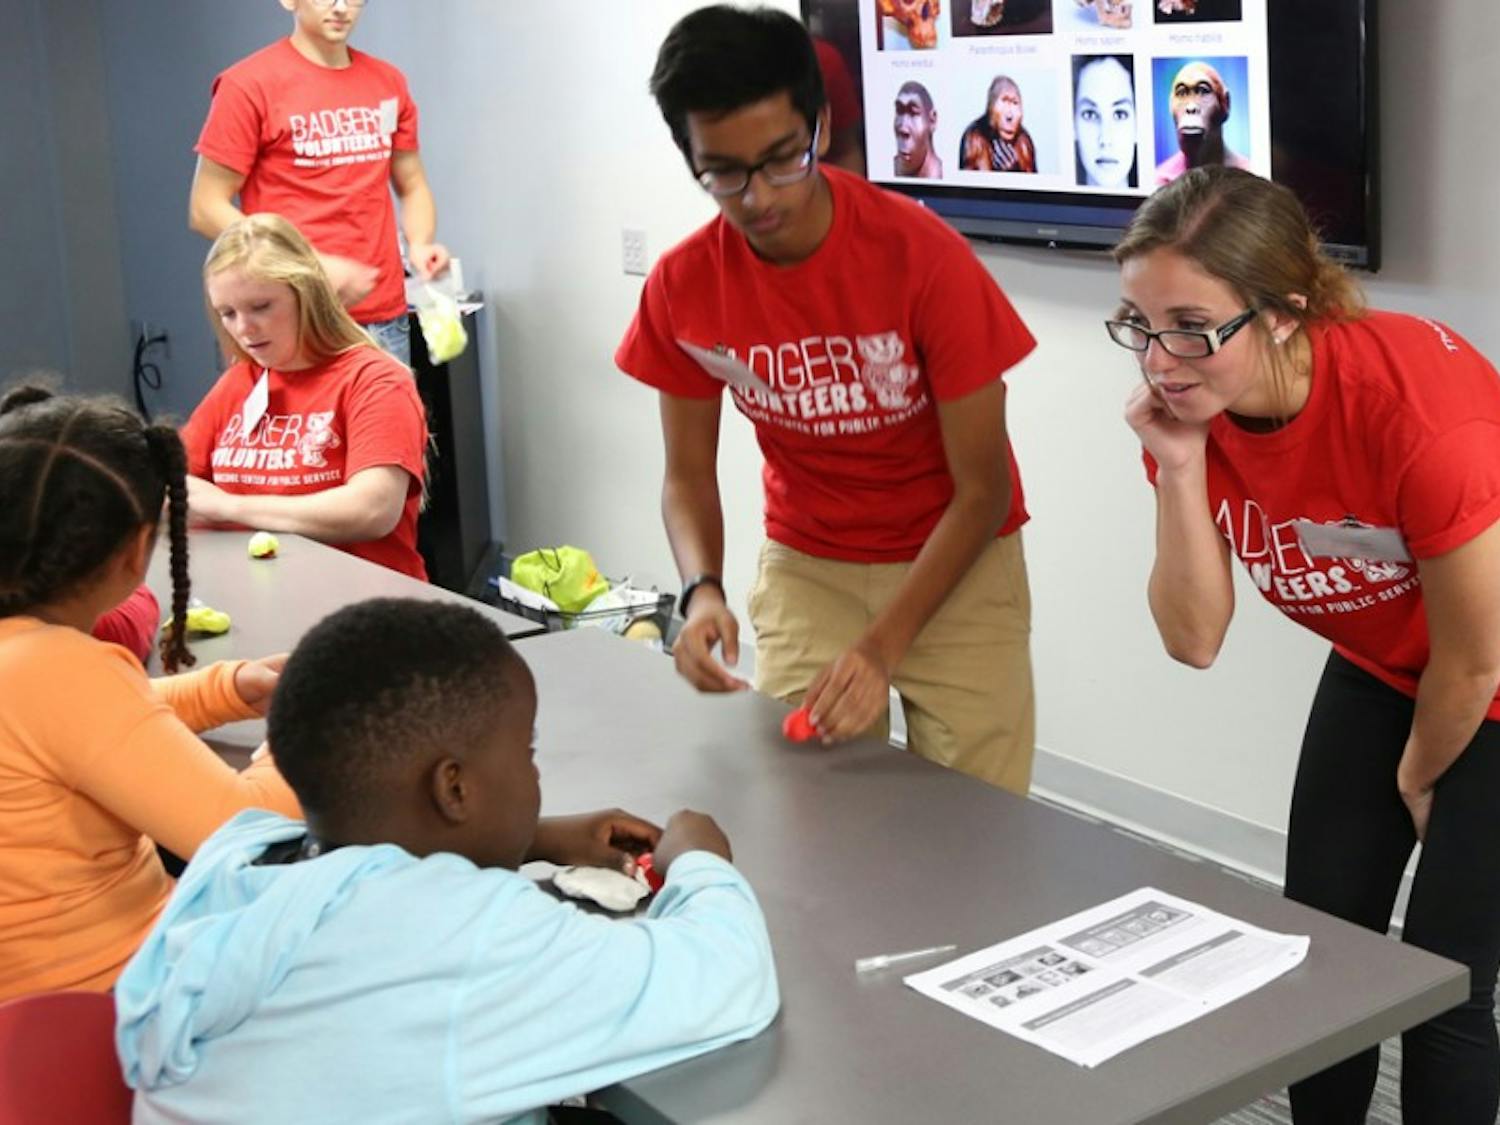 UW South Madison Partnership offers several programs, including the science outreach program Afterschool Expeditions, to reach more students in Madison.